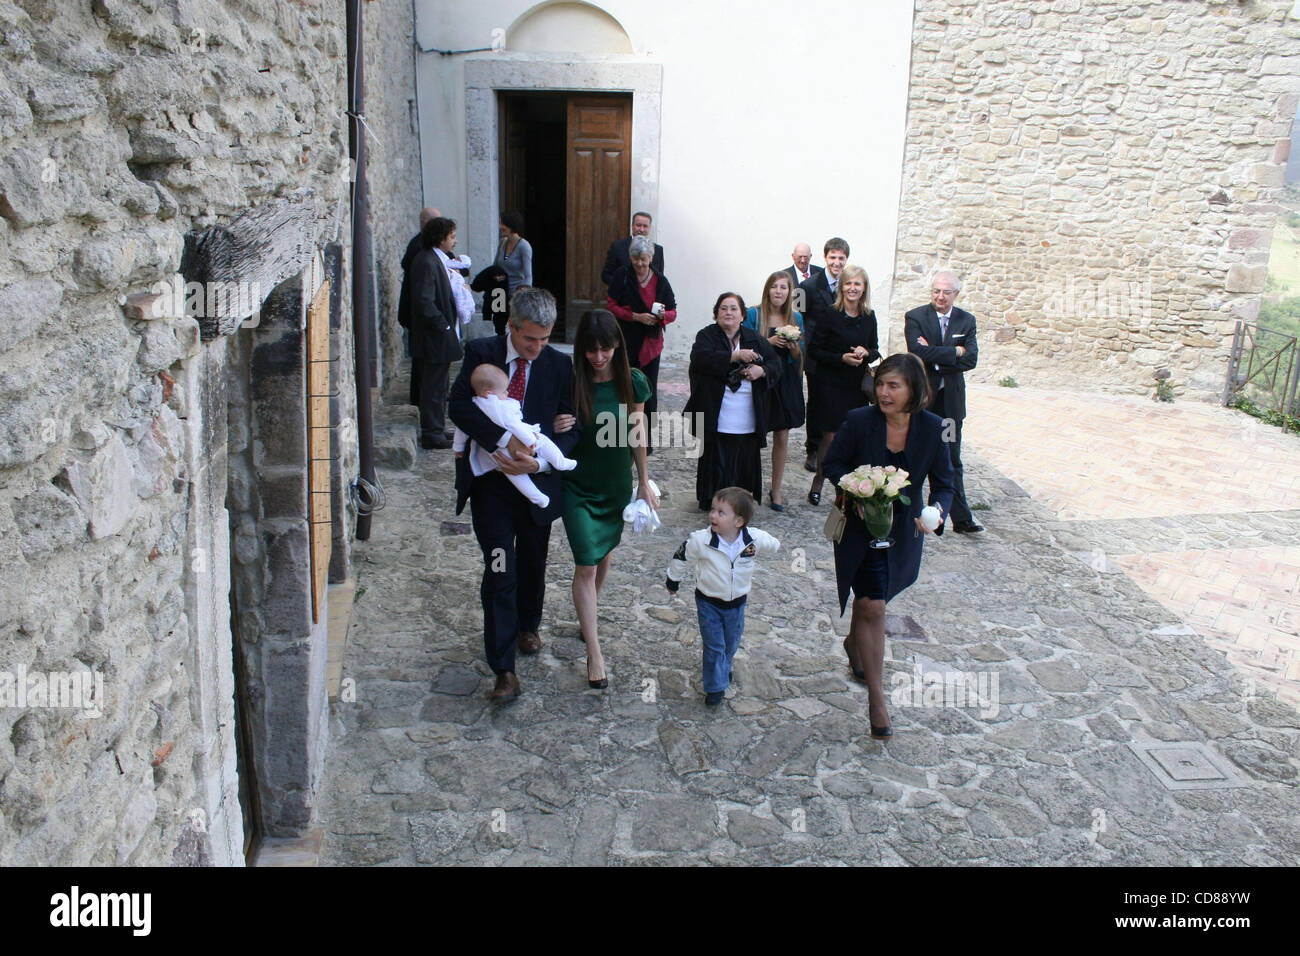 Oct 04, 2008 - Roccascalegna, Chieti, Italy - Actor DERMOT MULRONEY with new Italian partner THARITA CESARONI and baby MABEL RAY coming out of the church after the Baptism. Far right EMY CASERONI, Tharita's mother. (Credit Image: © Luciano Borsari/ZUMA Press) Stock Photo